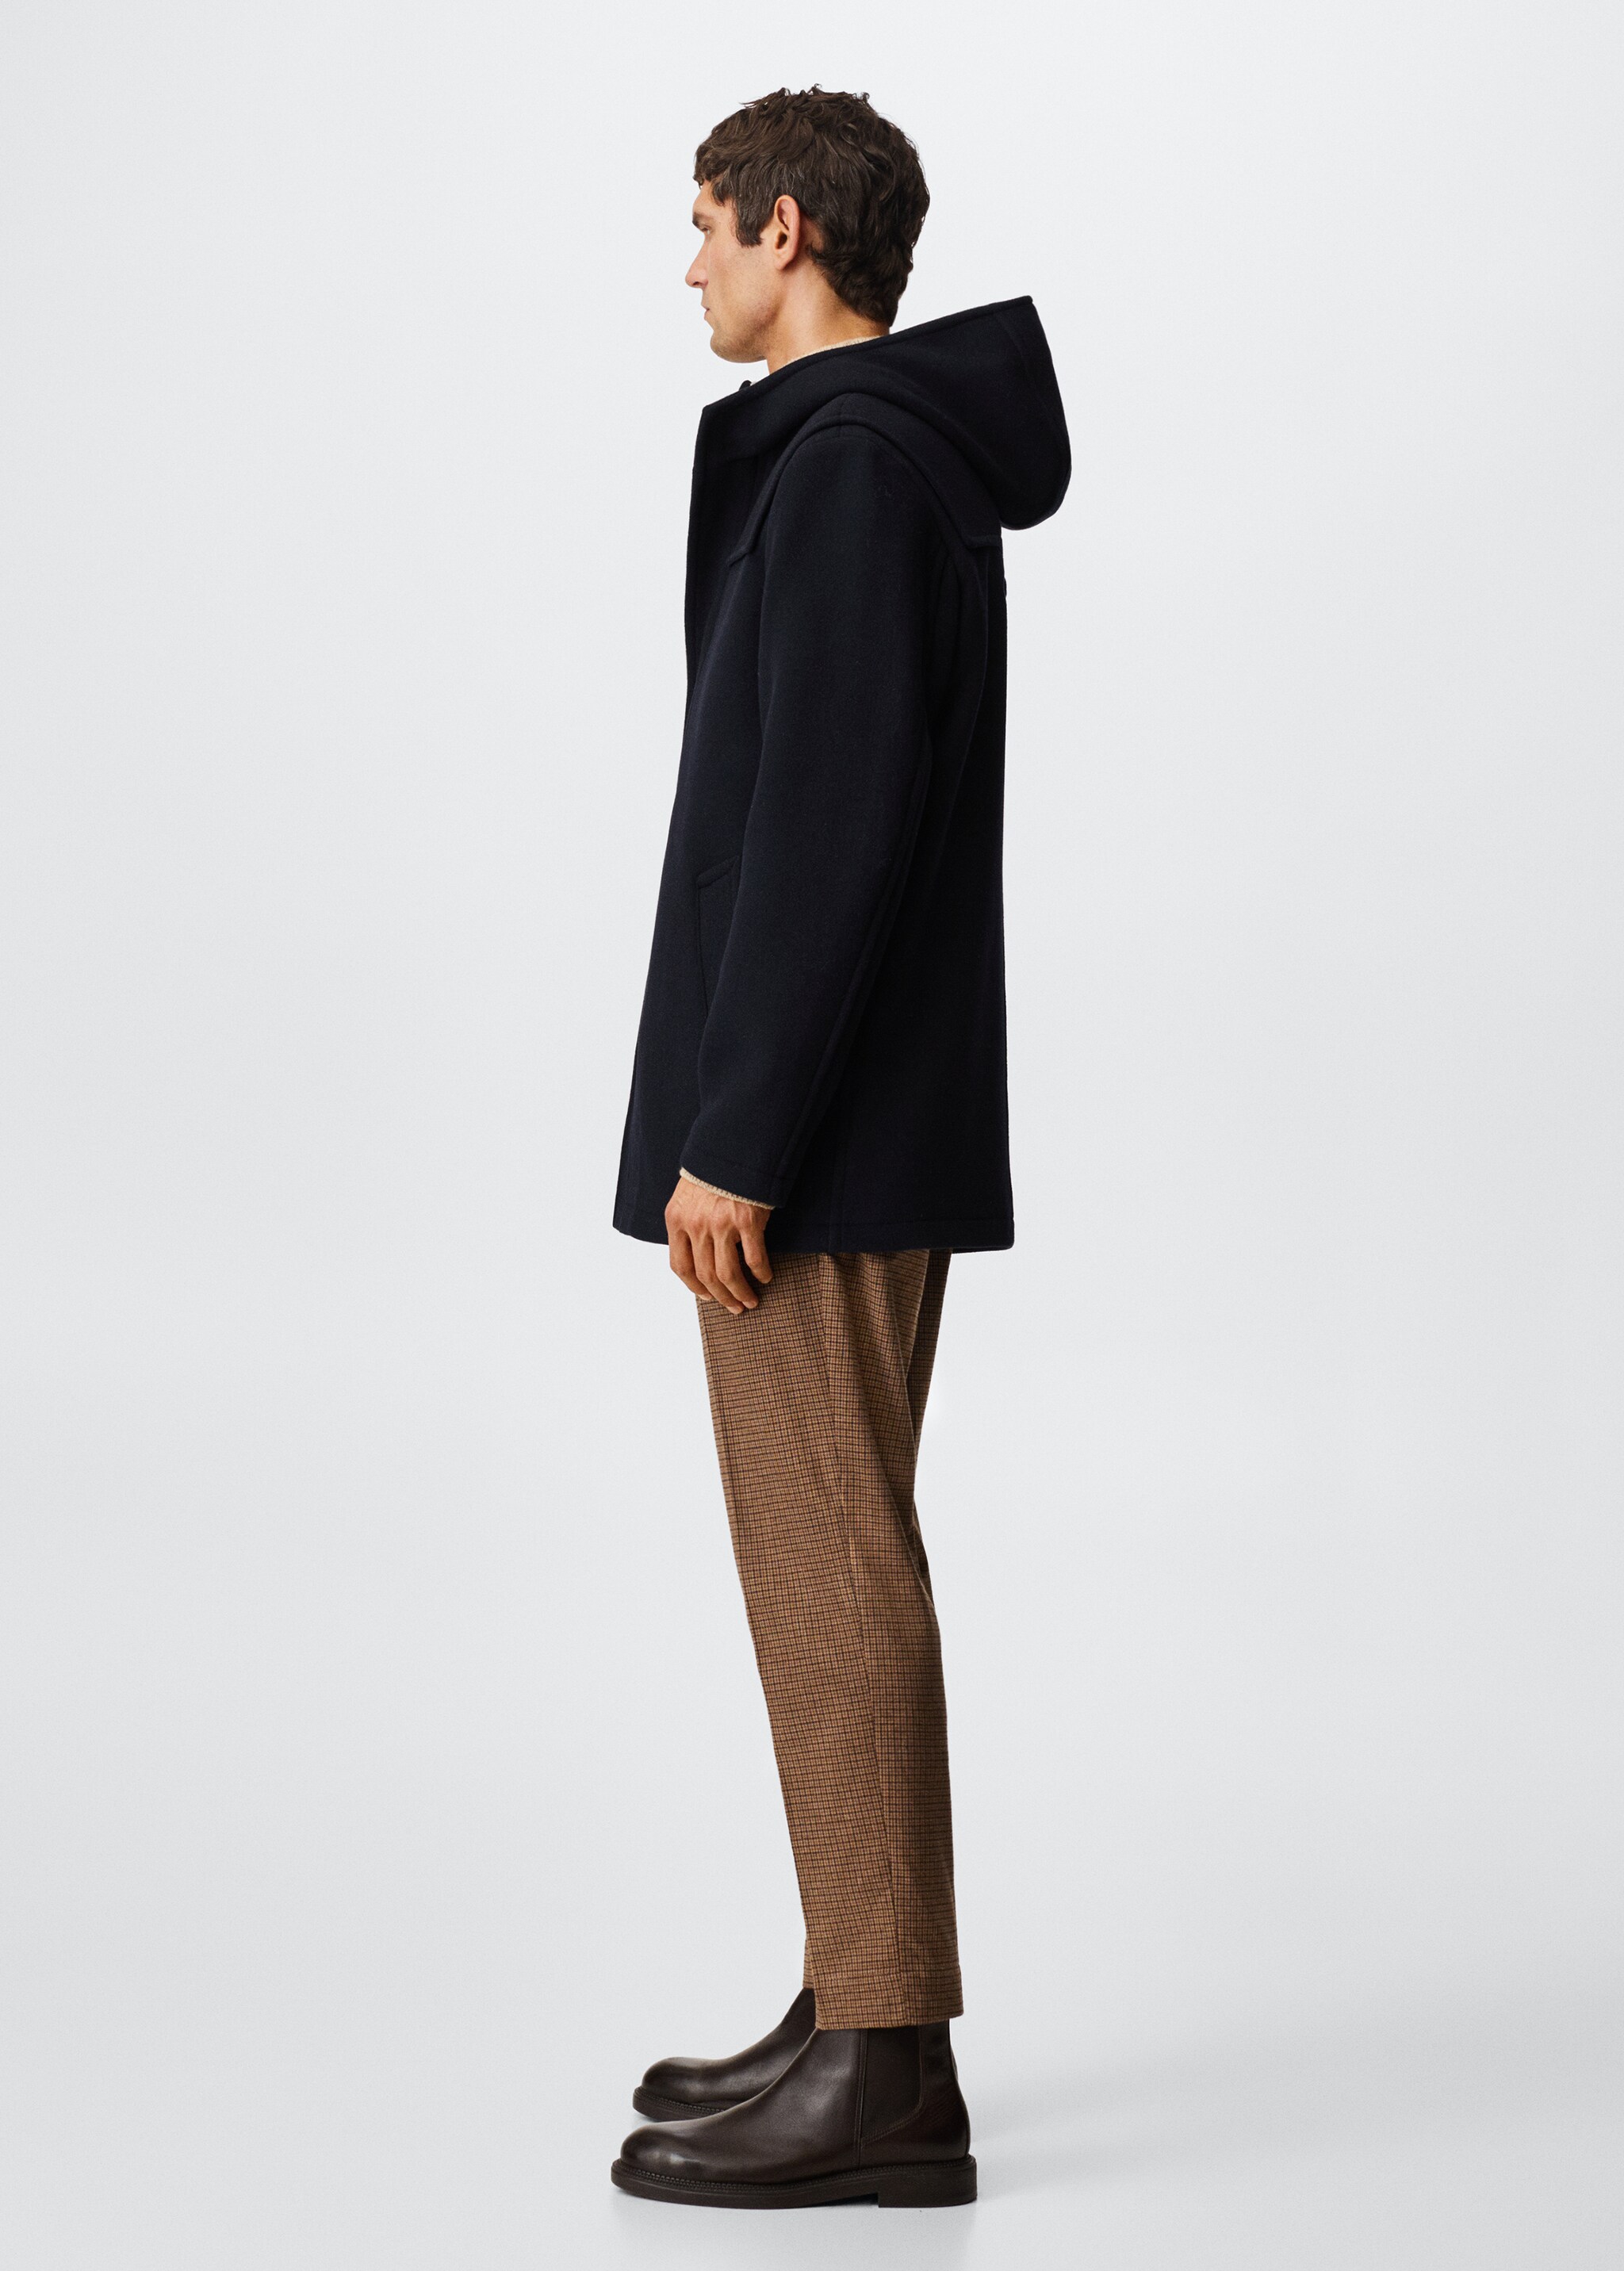 Hooded wool coat - Details of the article 6